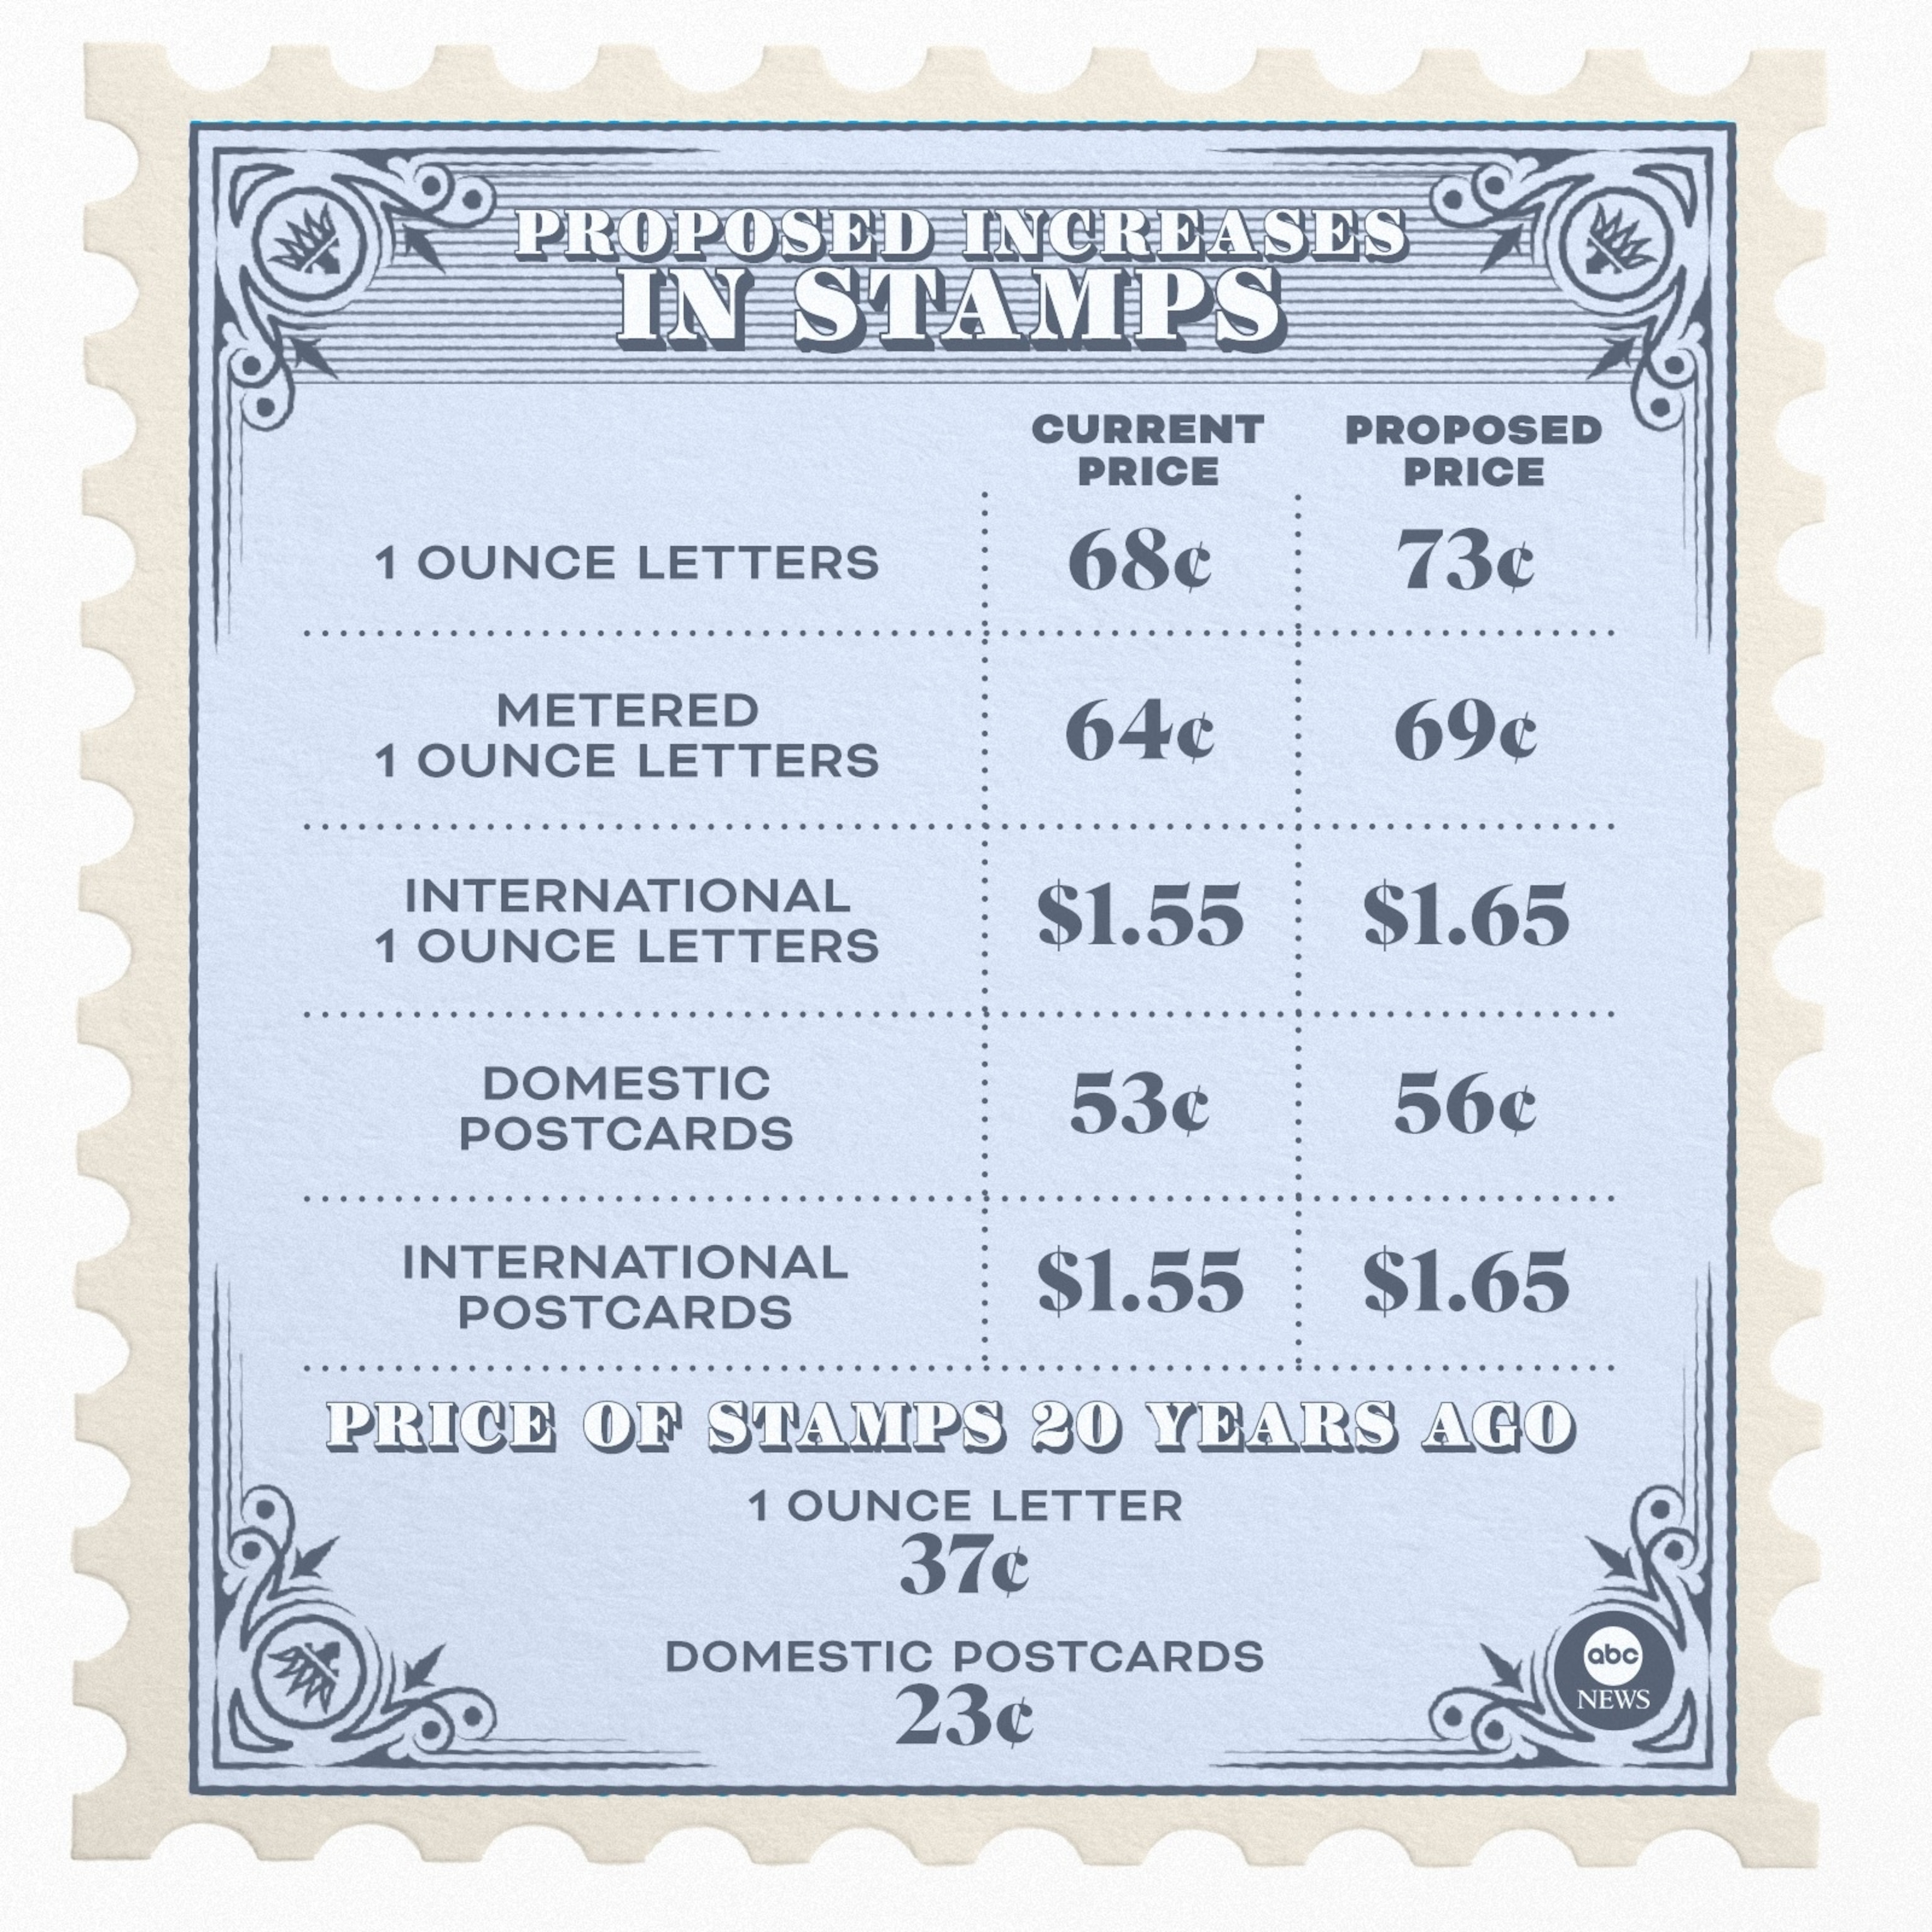 PHOTO: Proposed Increases in Stamps